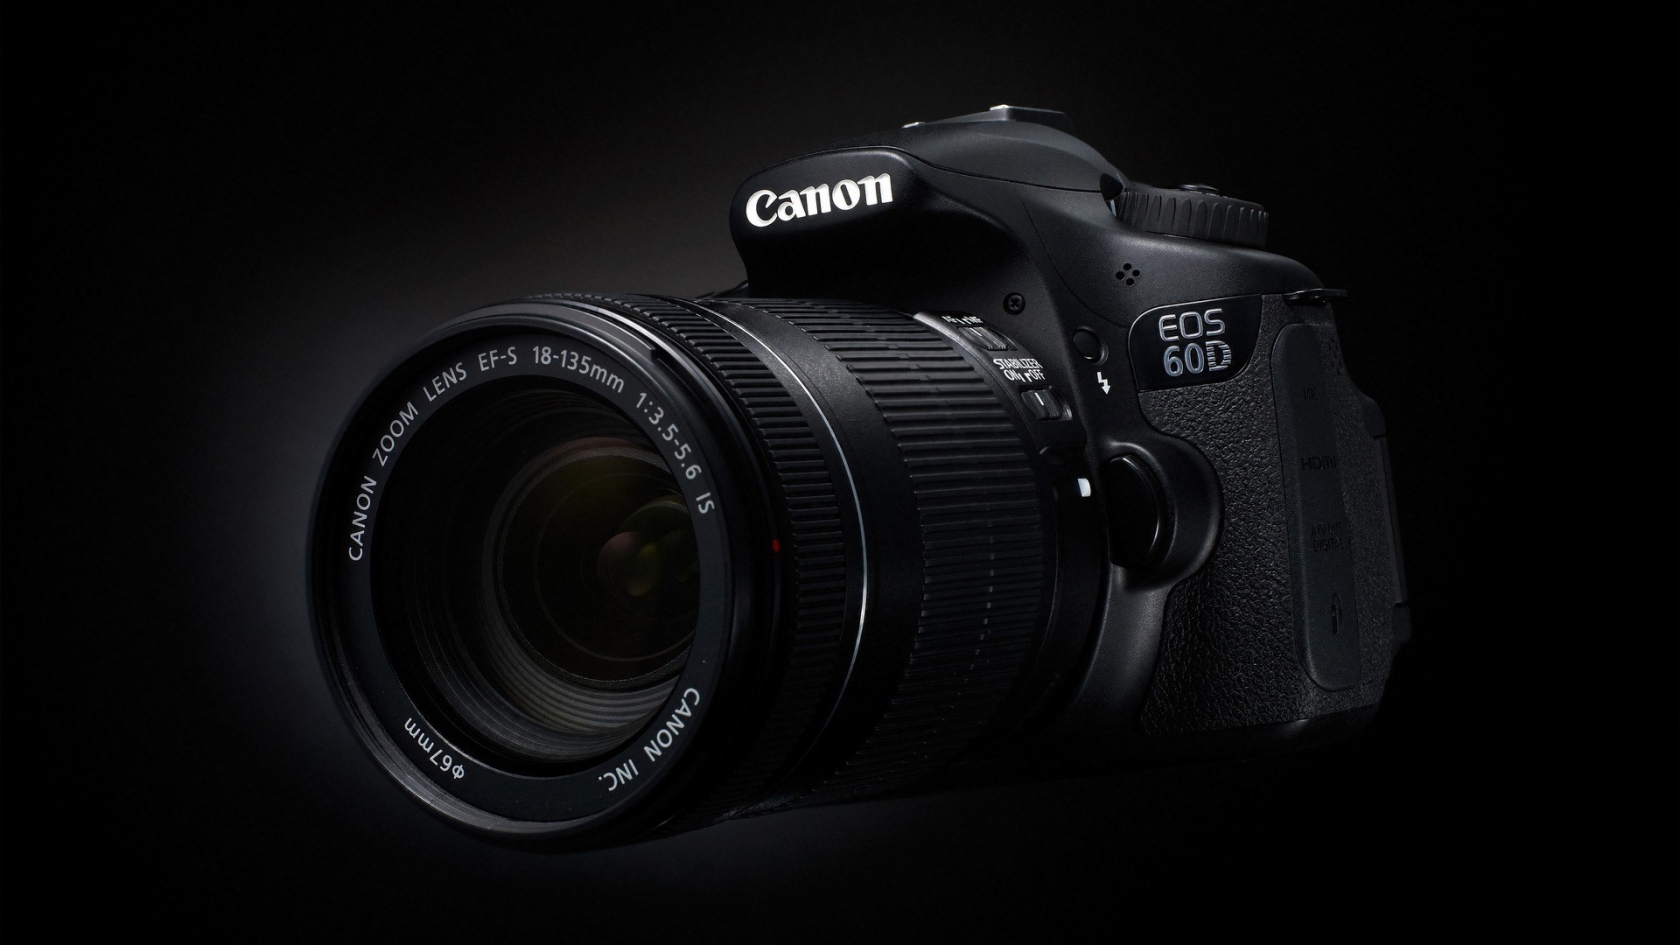 Canon EOS 60D for 1680 x 945 HDTV resolution